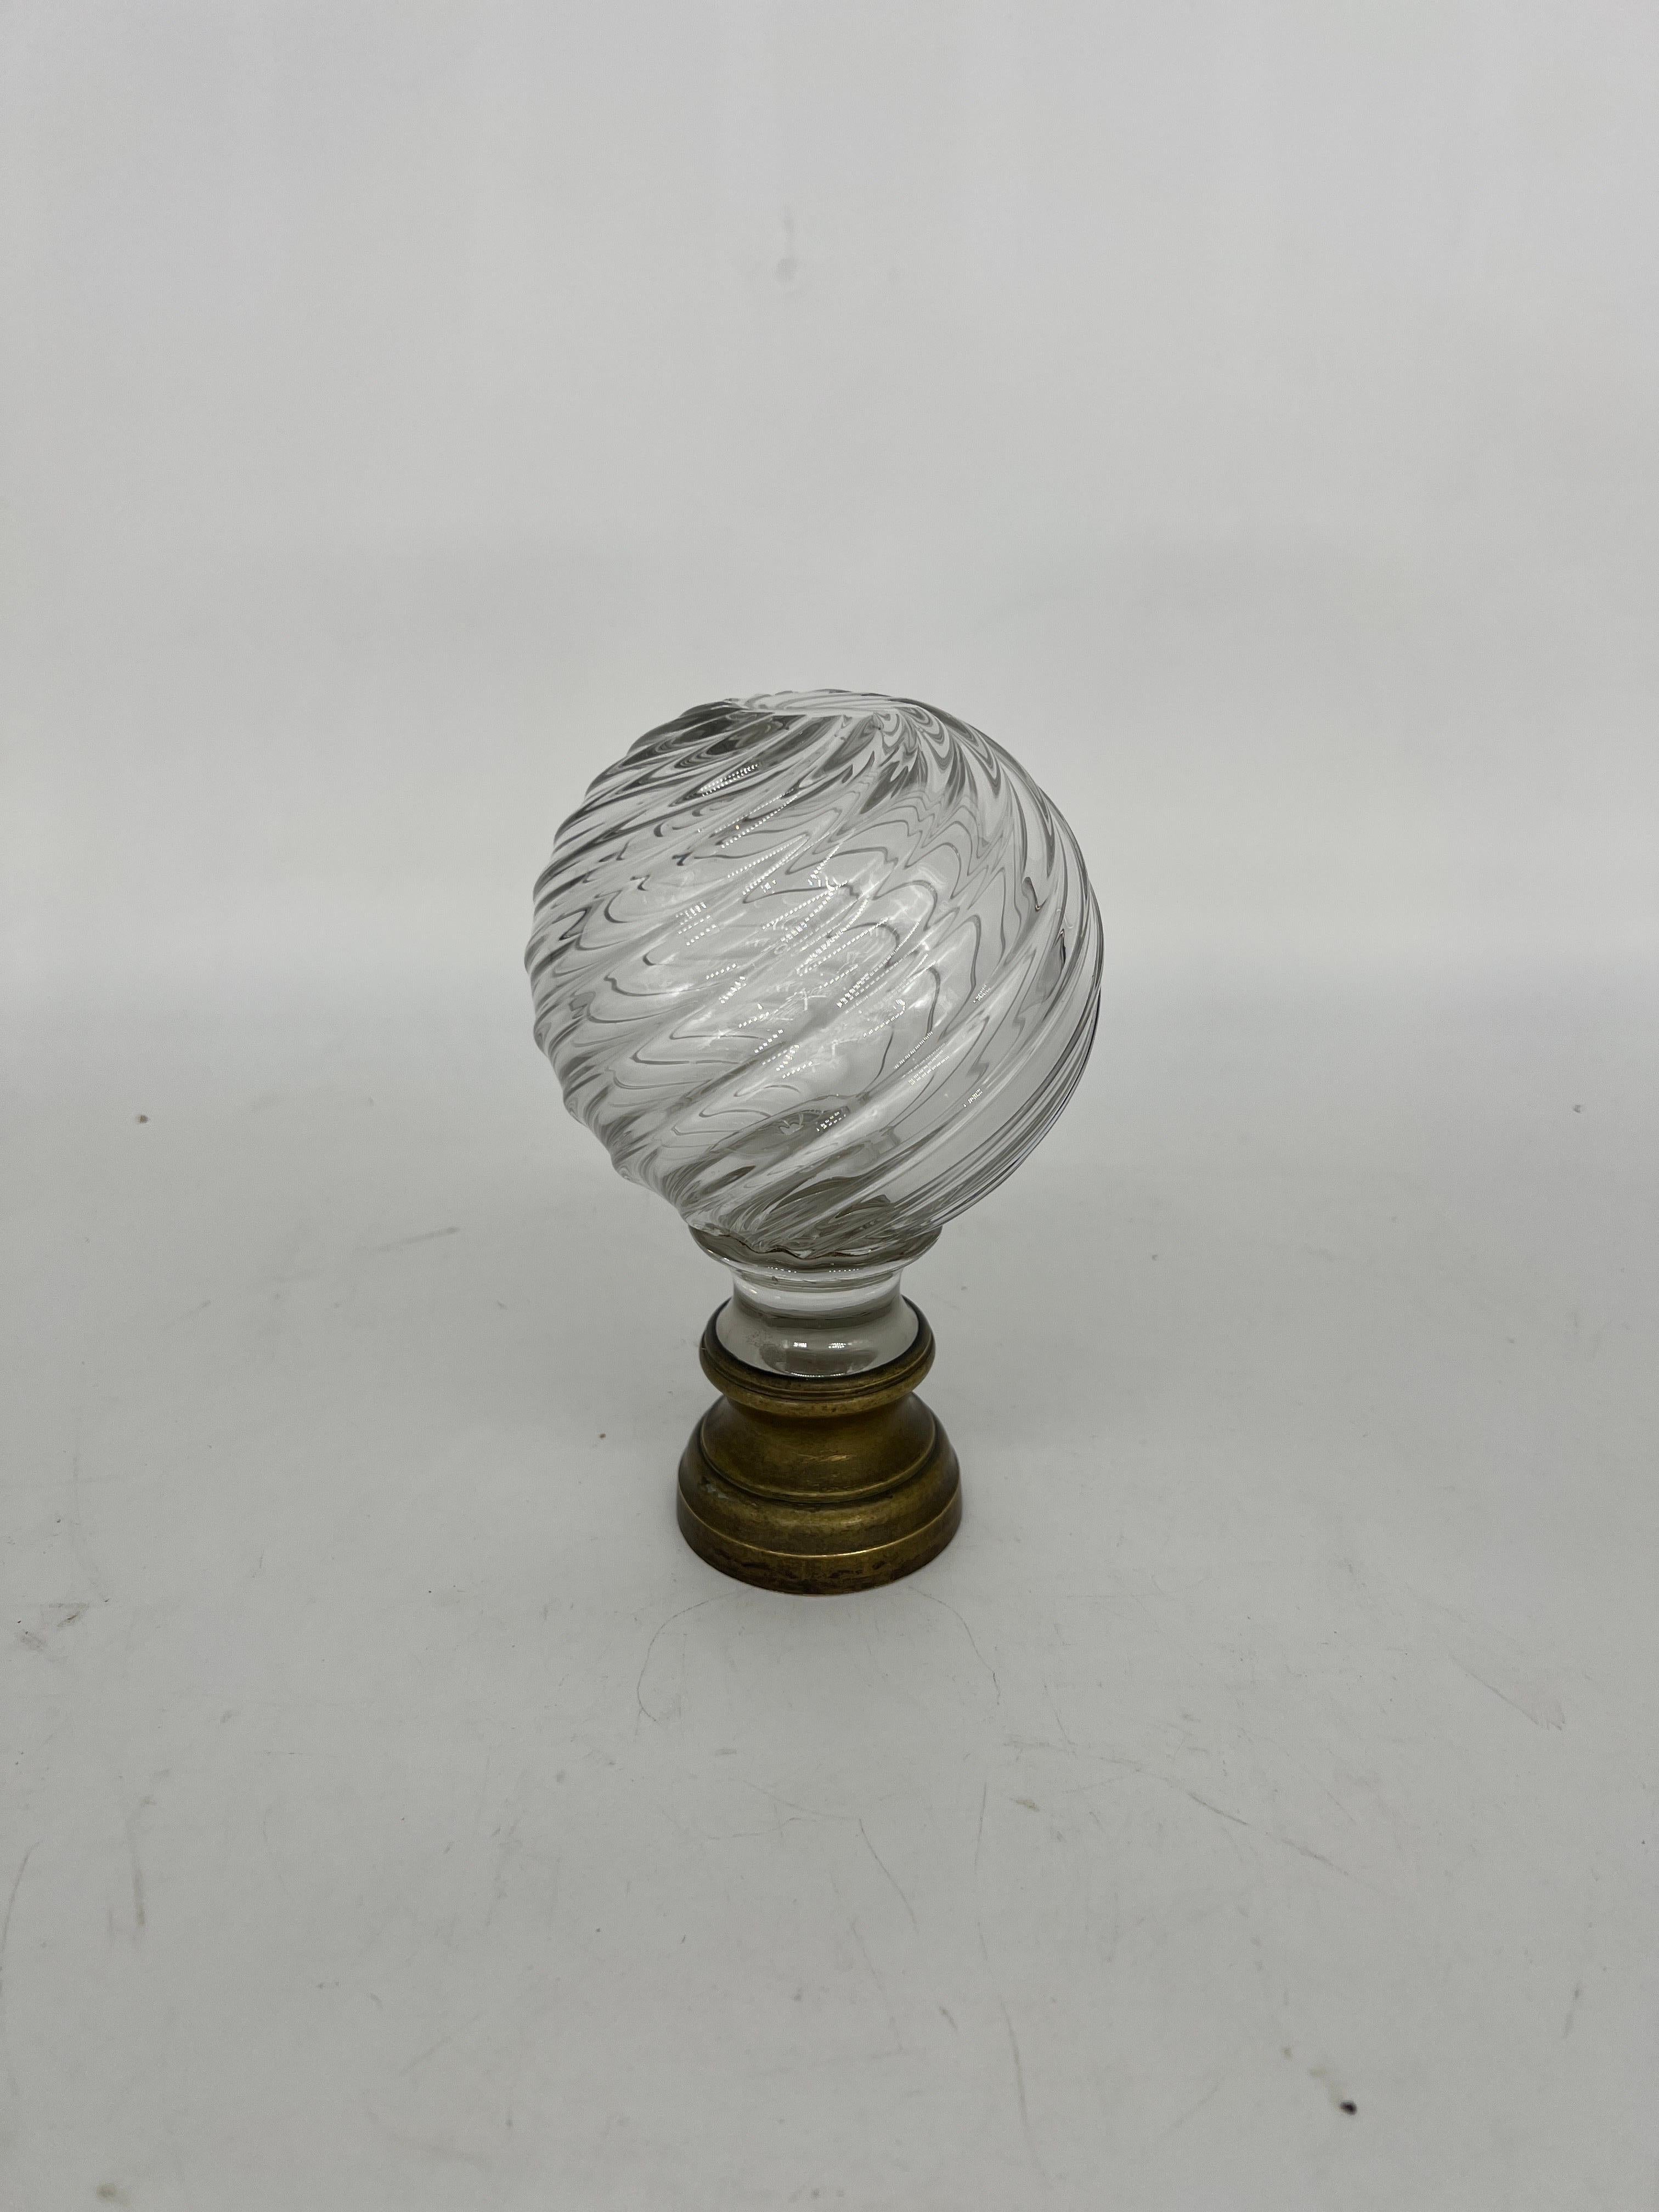 A French antique crystal and bronze mounted newel post finial with a swirled ball design reminiscent of the famous Baccarat design. While unmarked - the quality and design is unmatched.